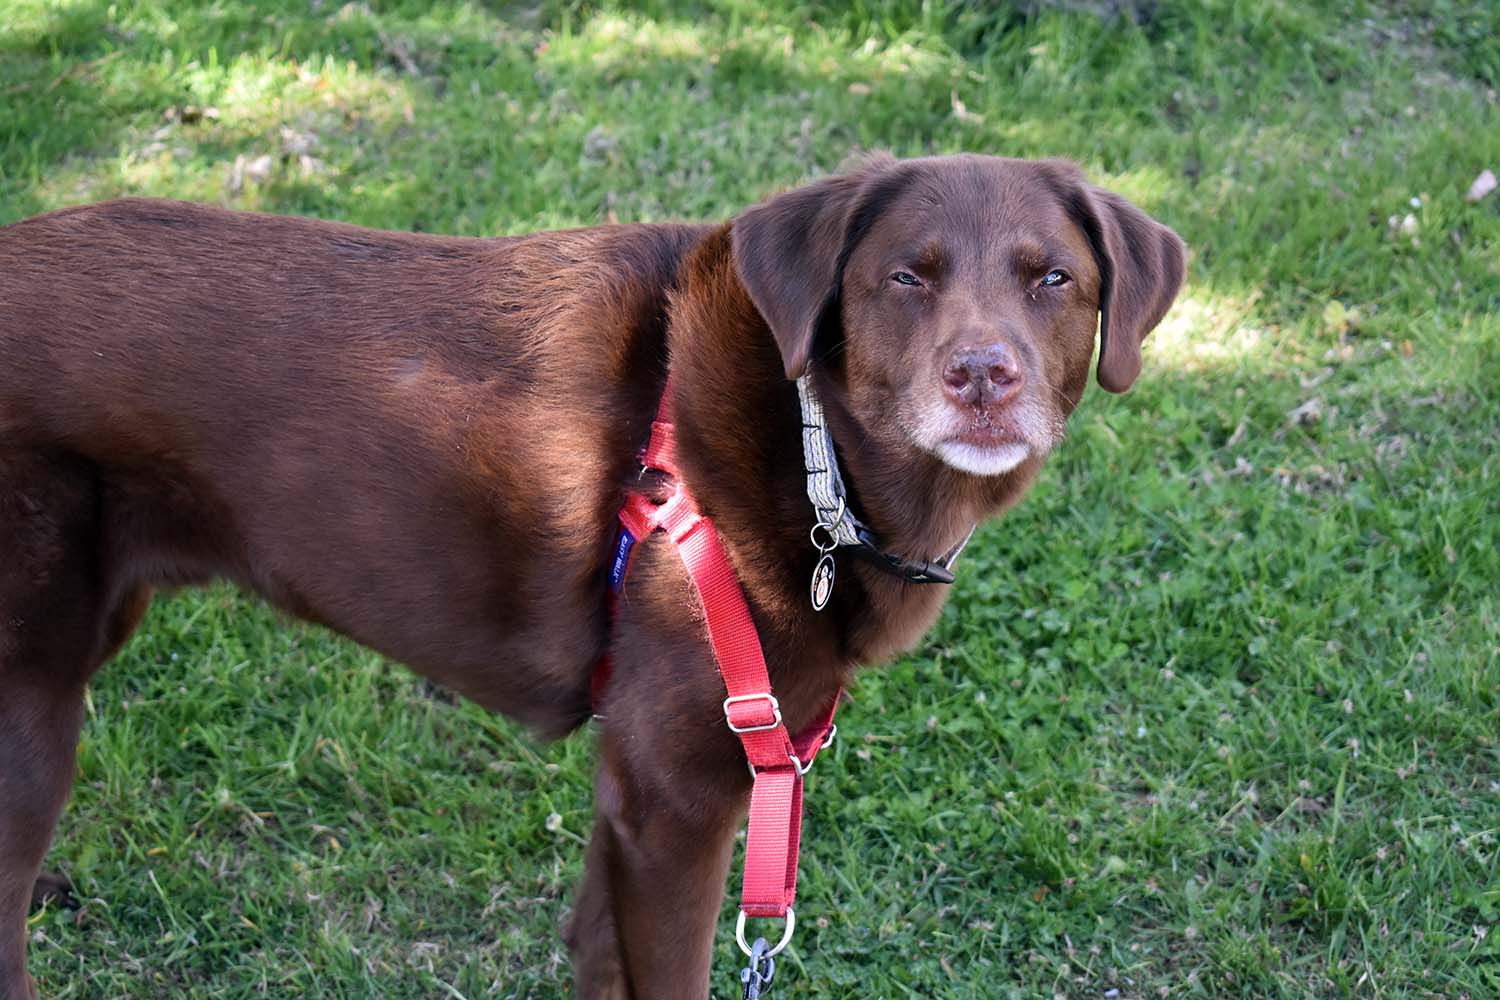 A brown dog stands in a patch of grass